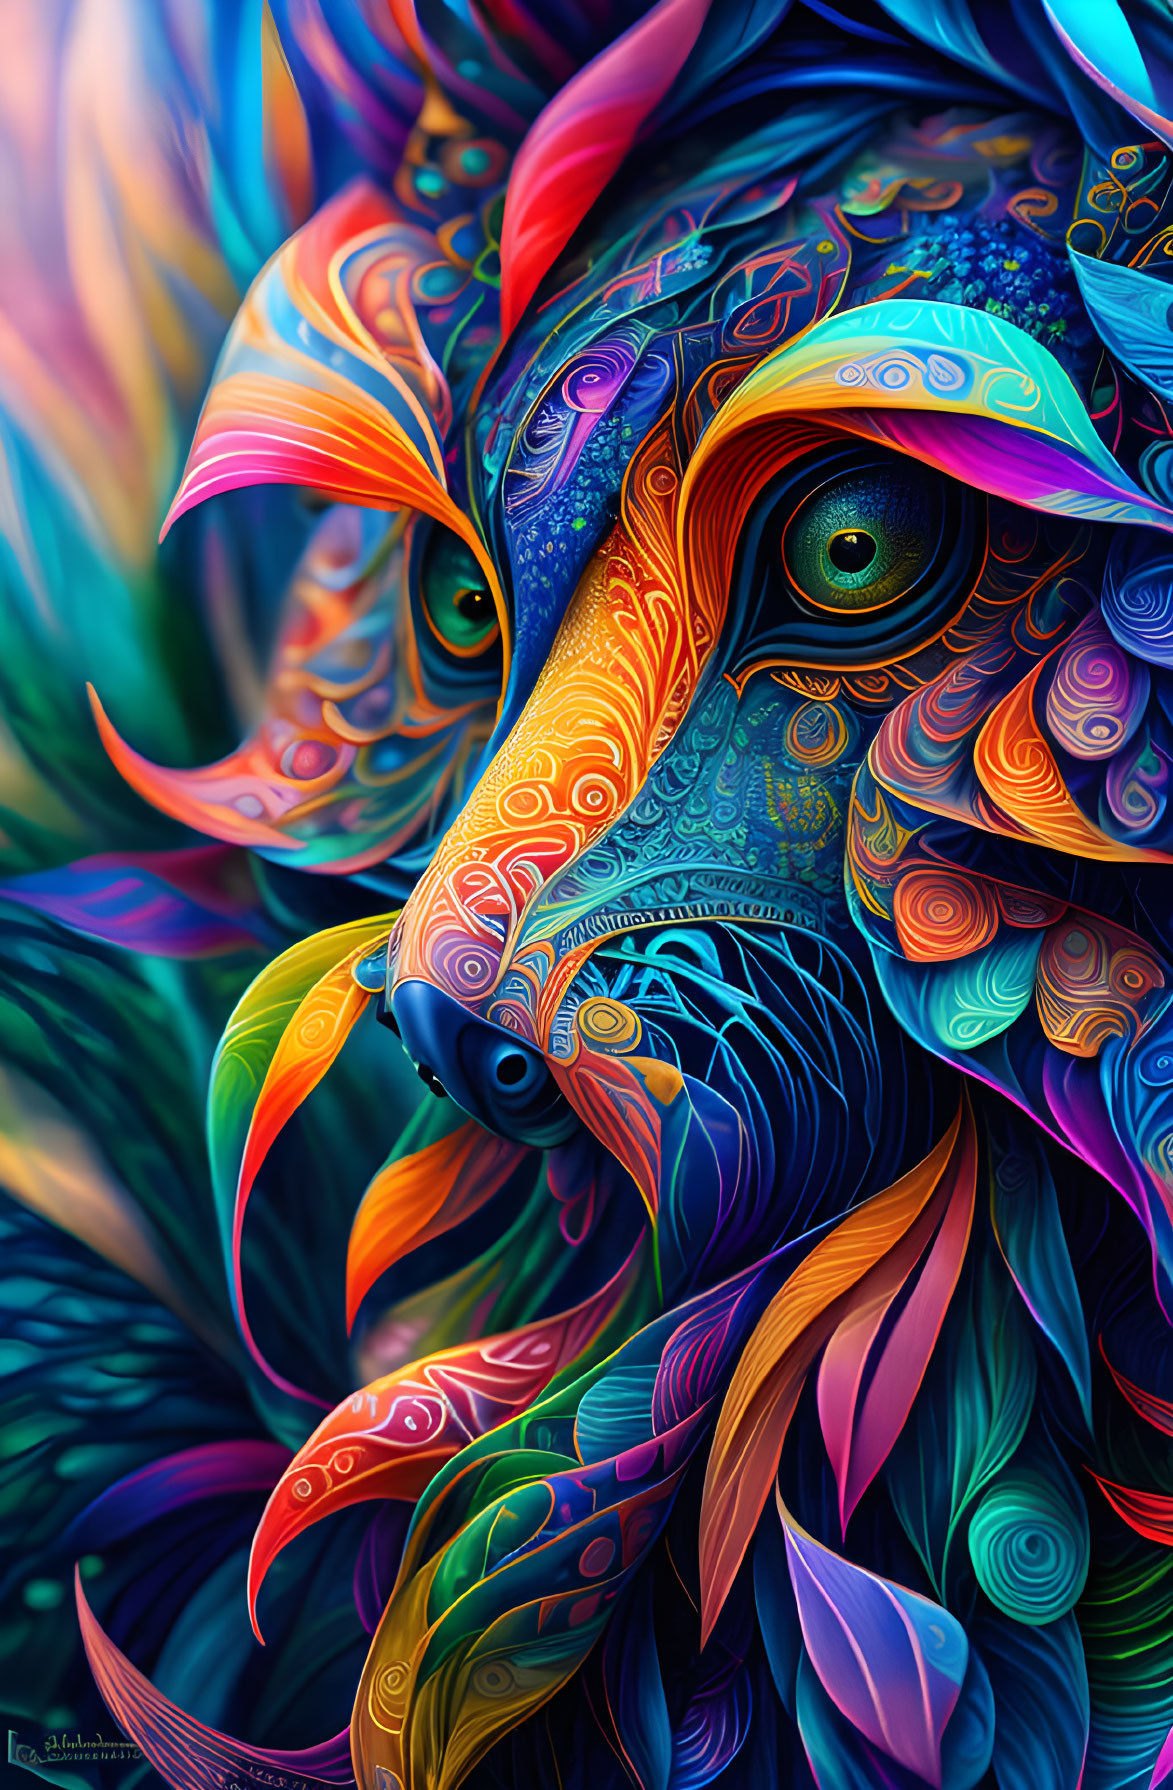 Colorful Wolf Illustration with Psychedelic Patterns and Piercing Eyes